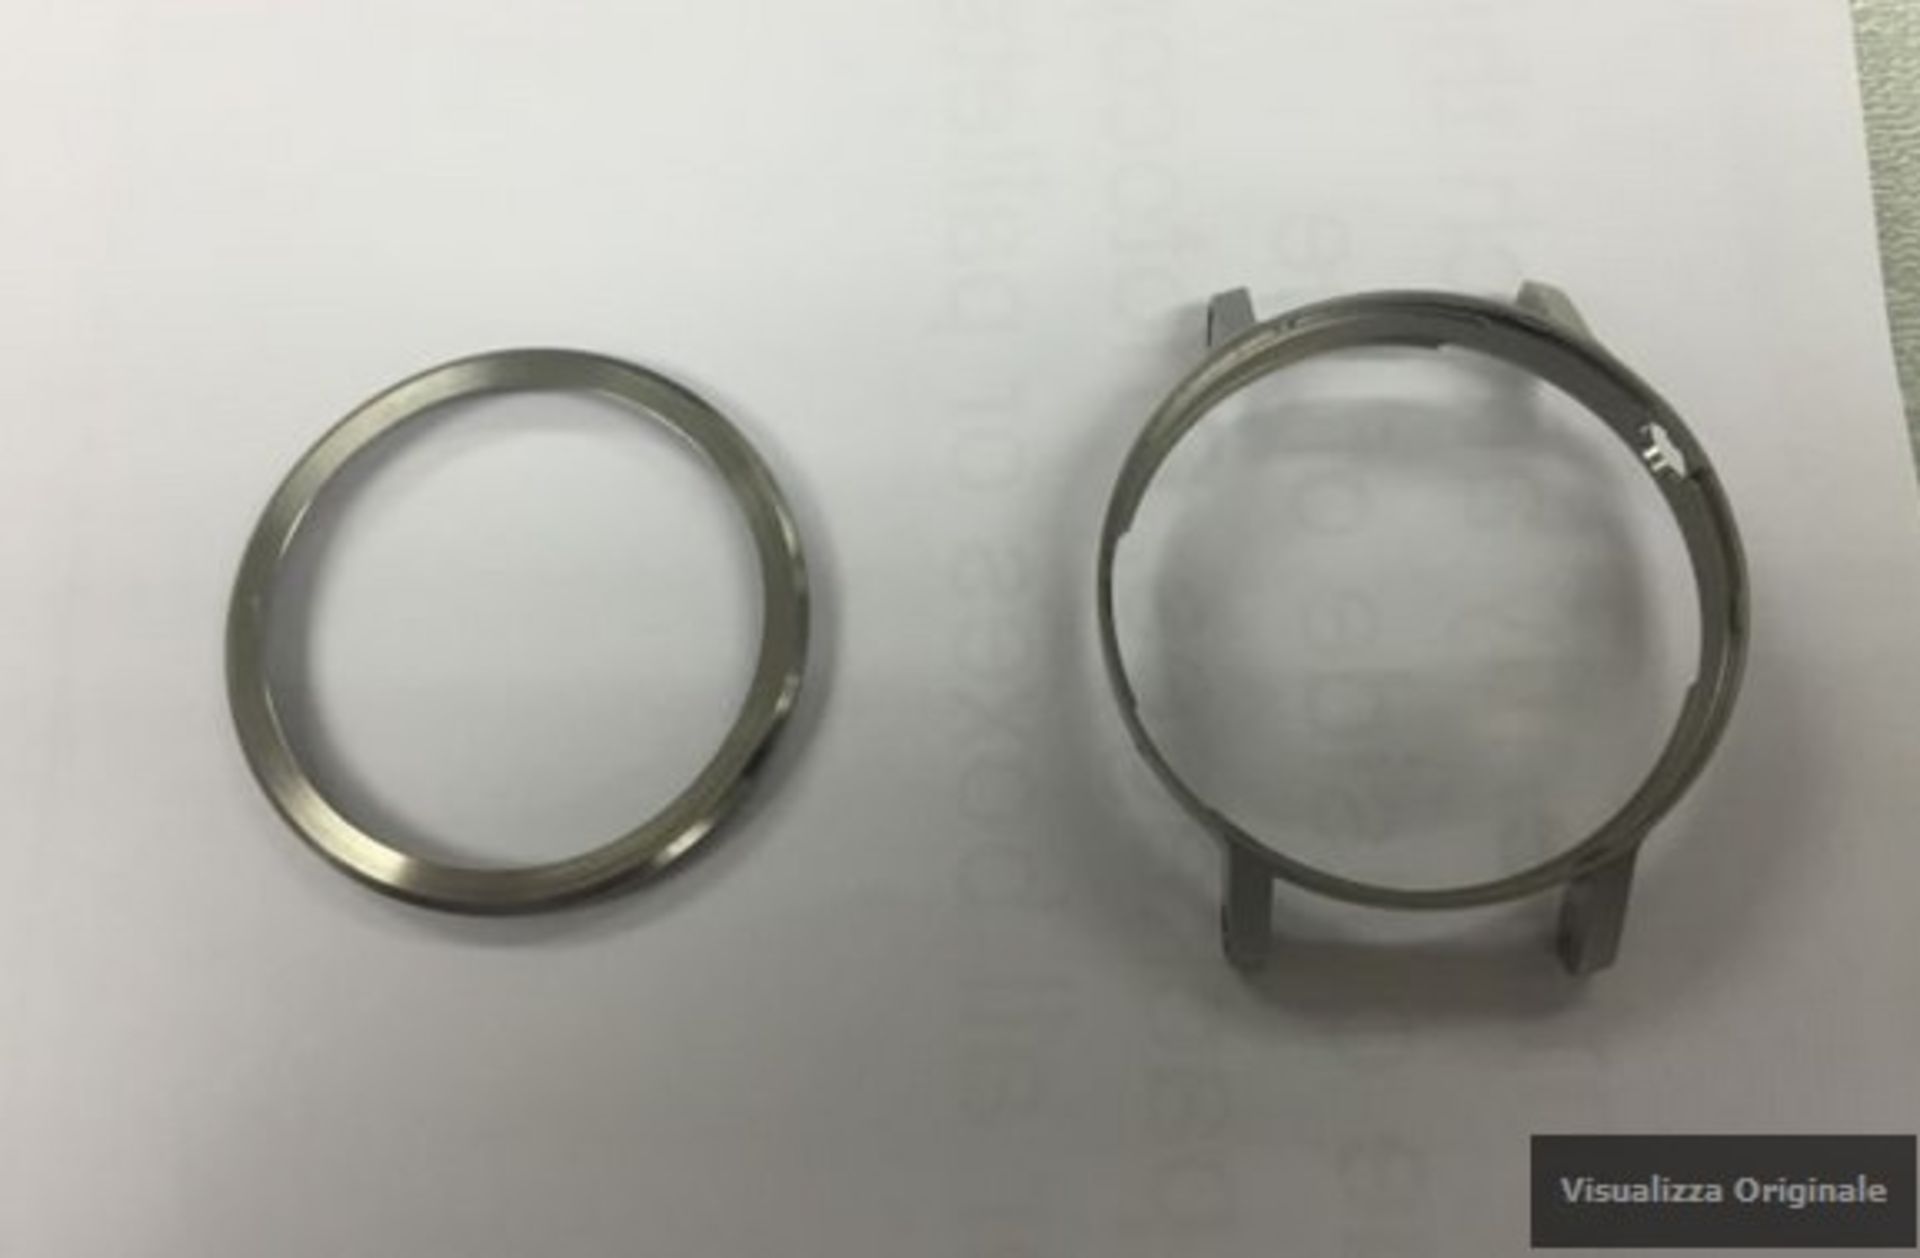 Leaked images of the Motorola Moto 360 sequel and the casing for the timepiece 4